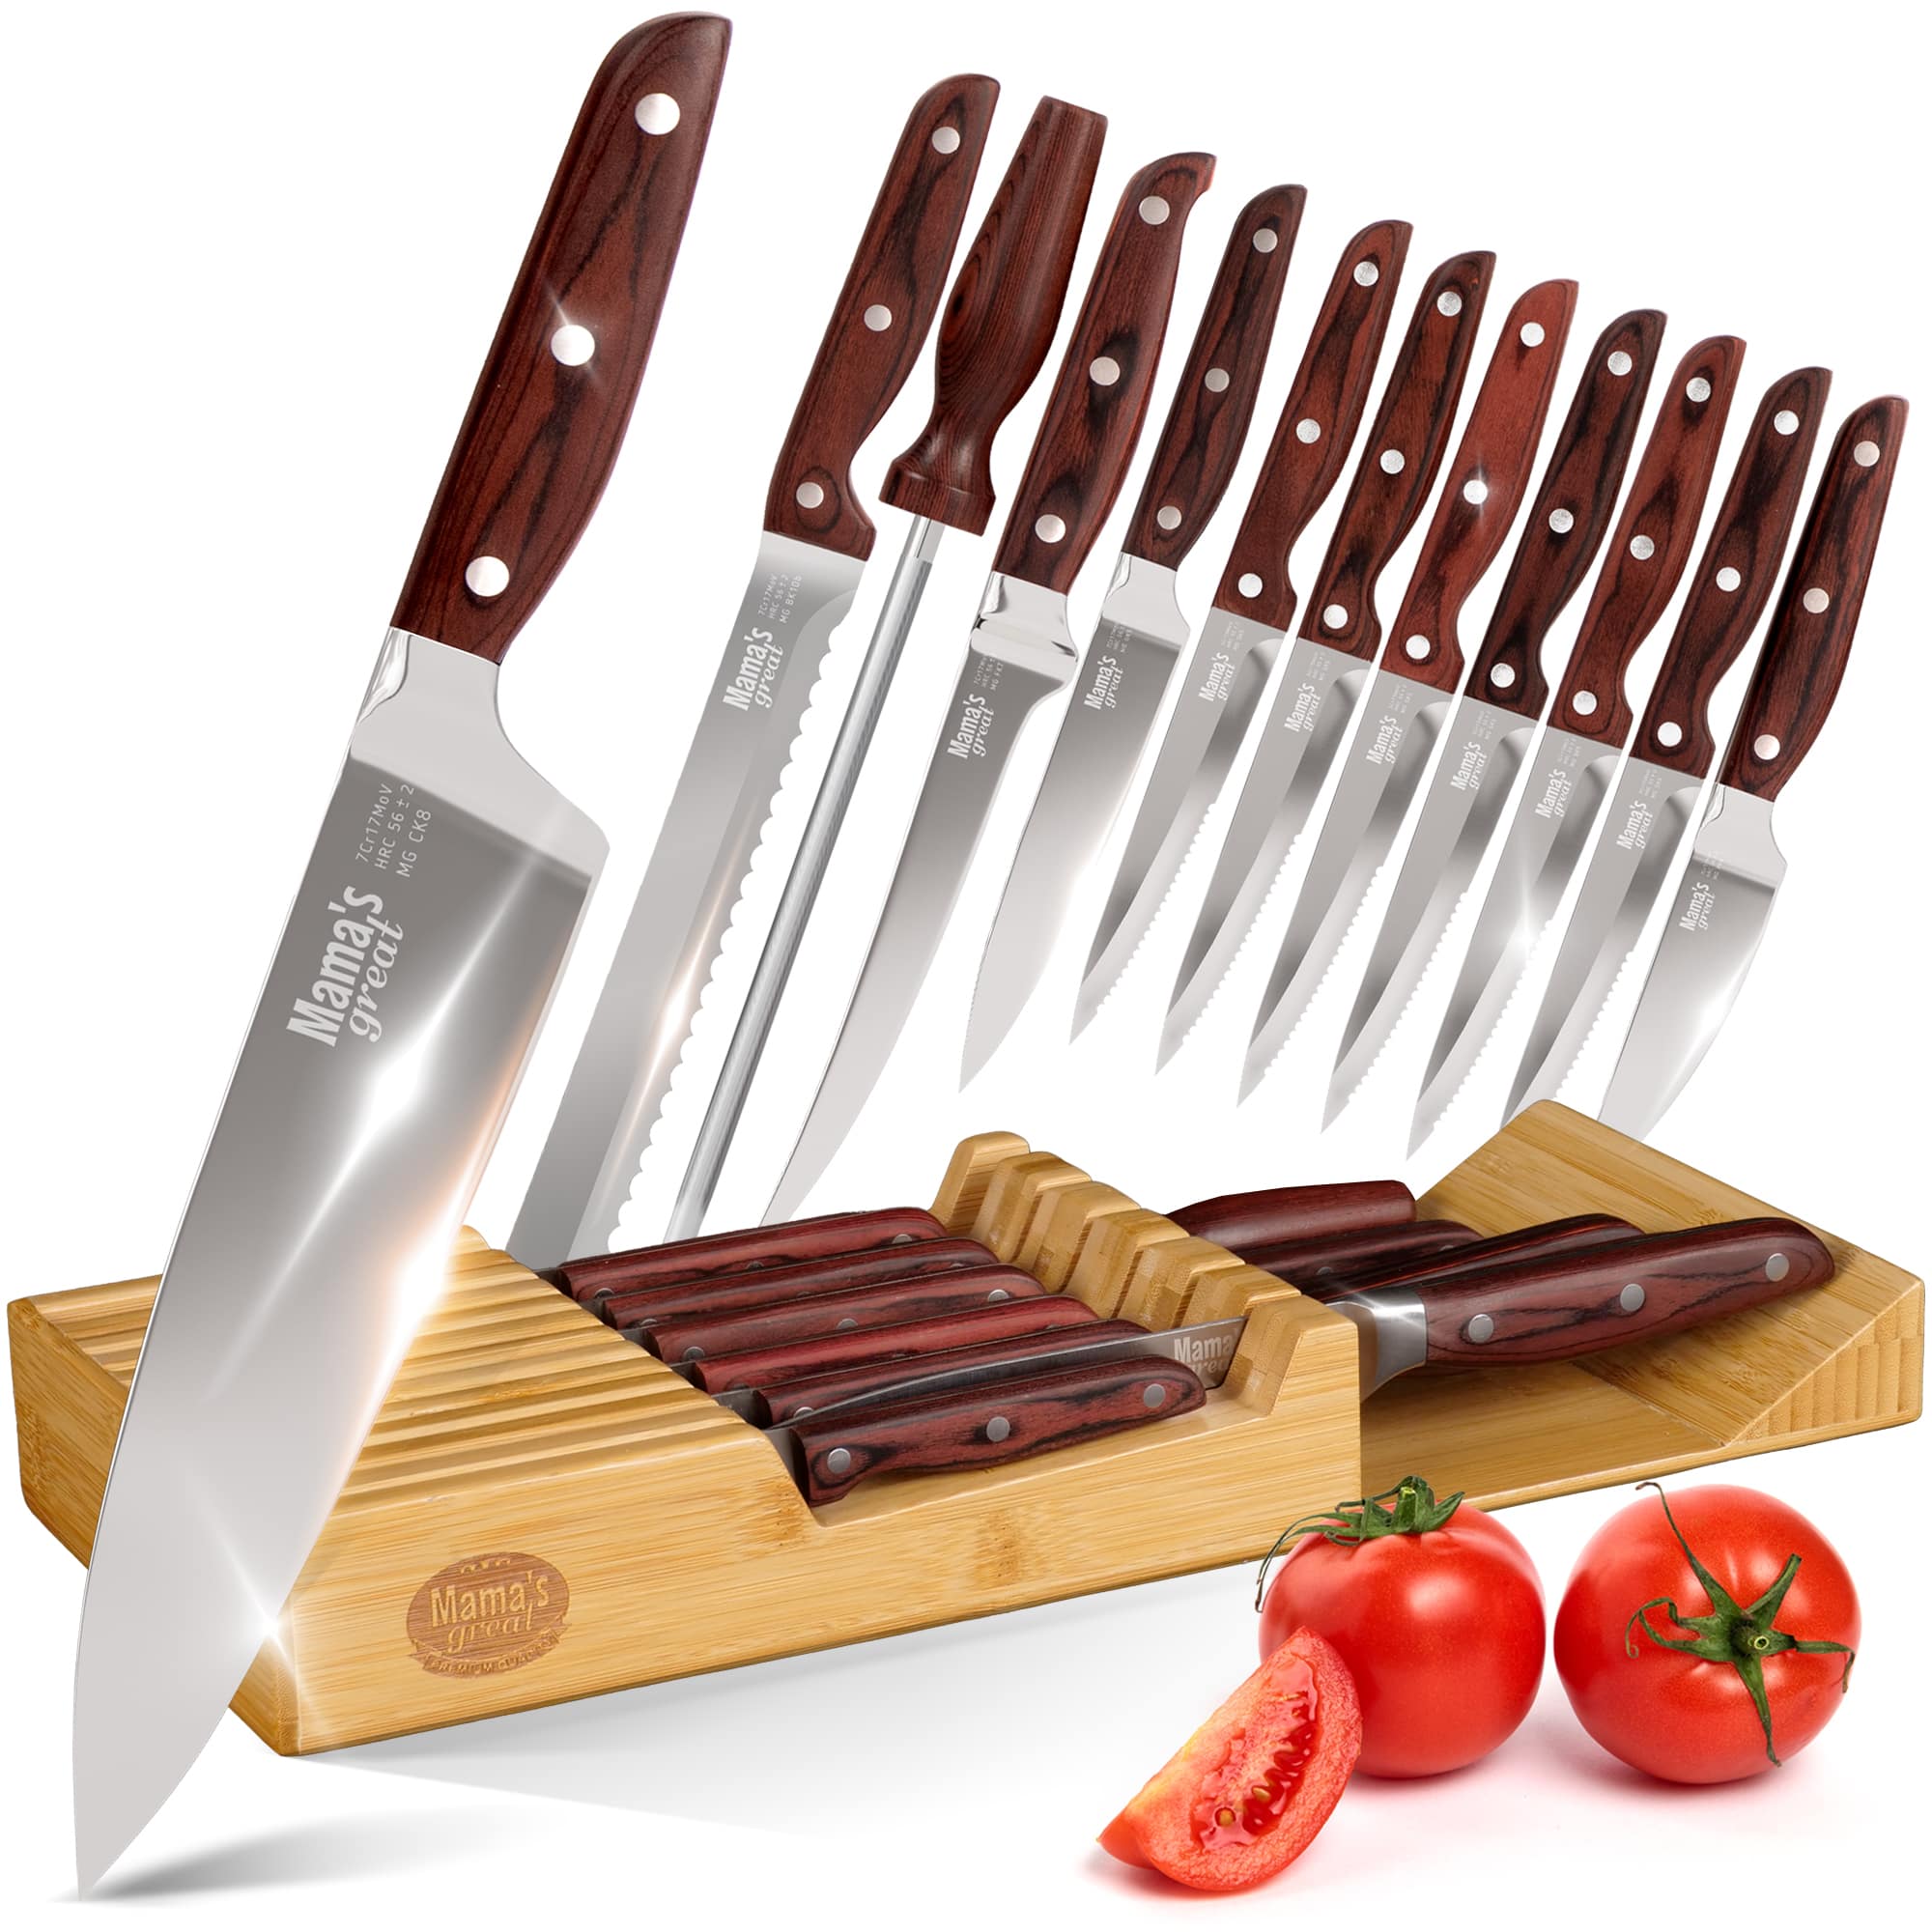 https://www.mamasgreat.com/wp-content/uploads/2022/11/Knife-set-with-block-for-drawer-min.jpg